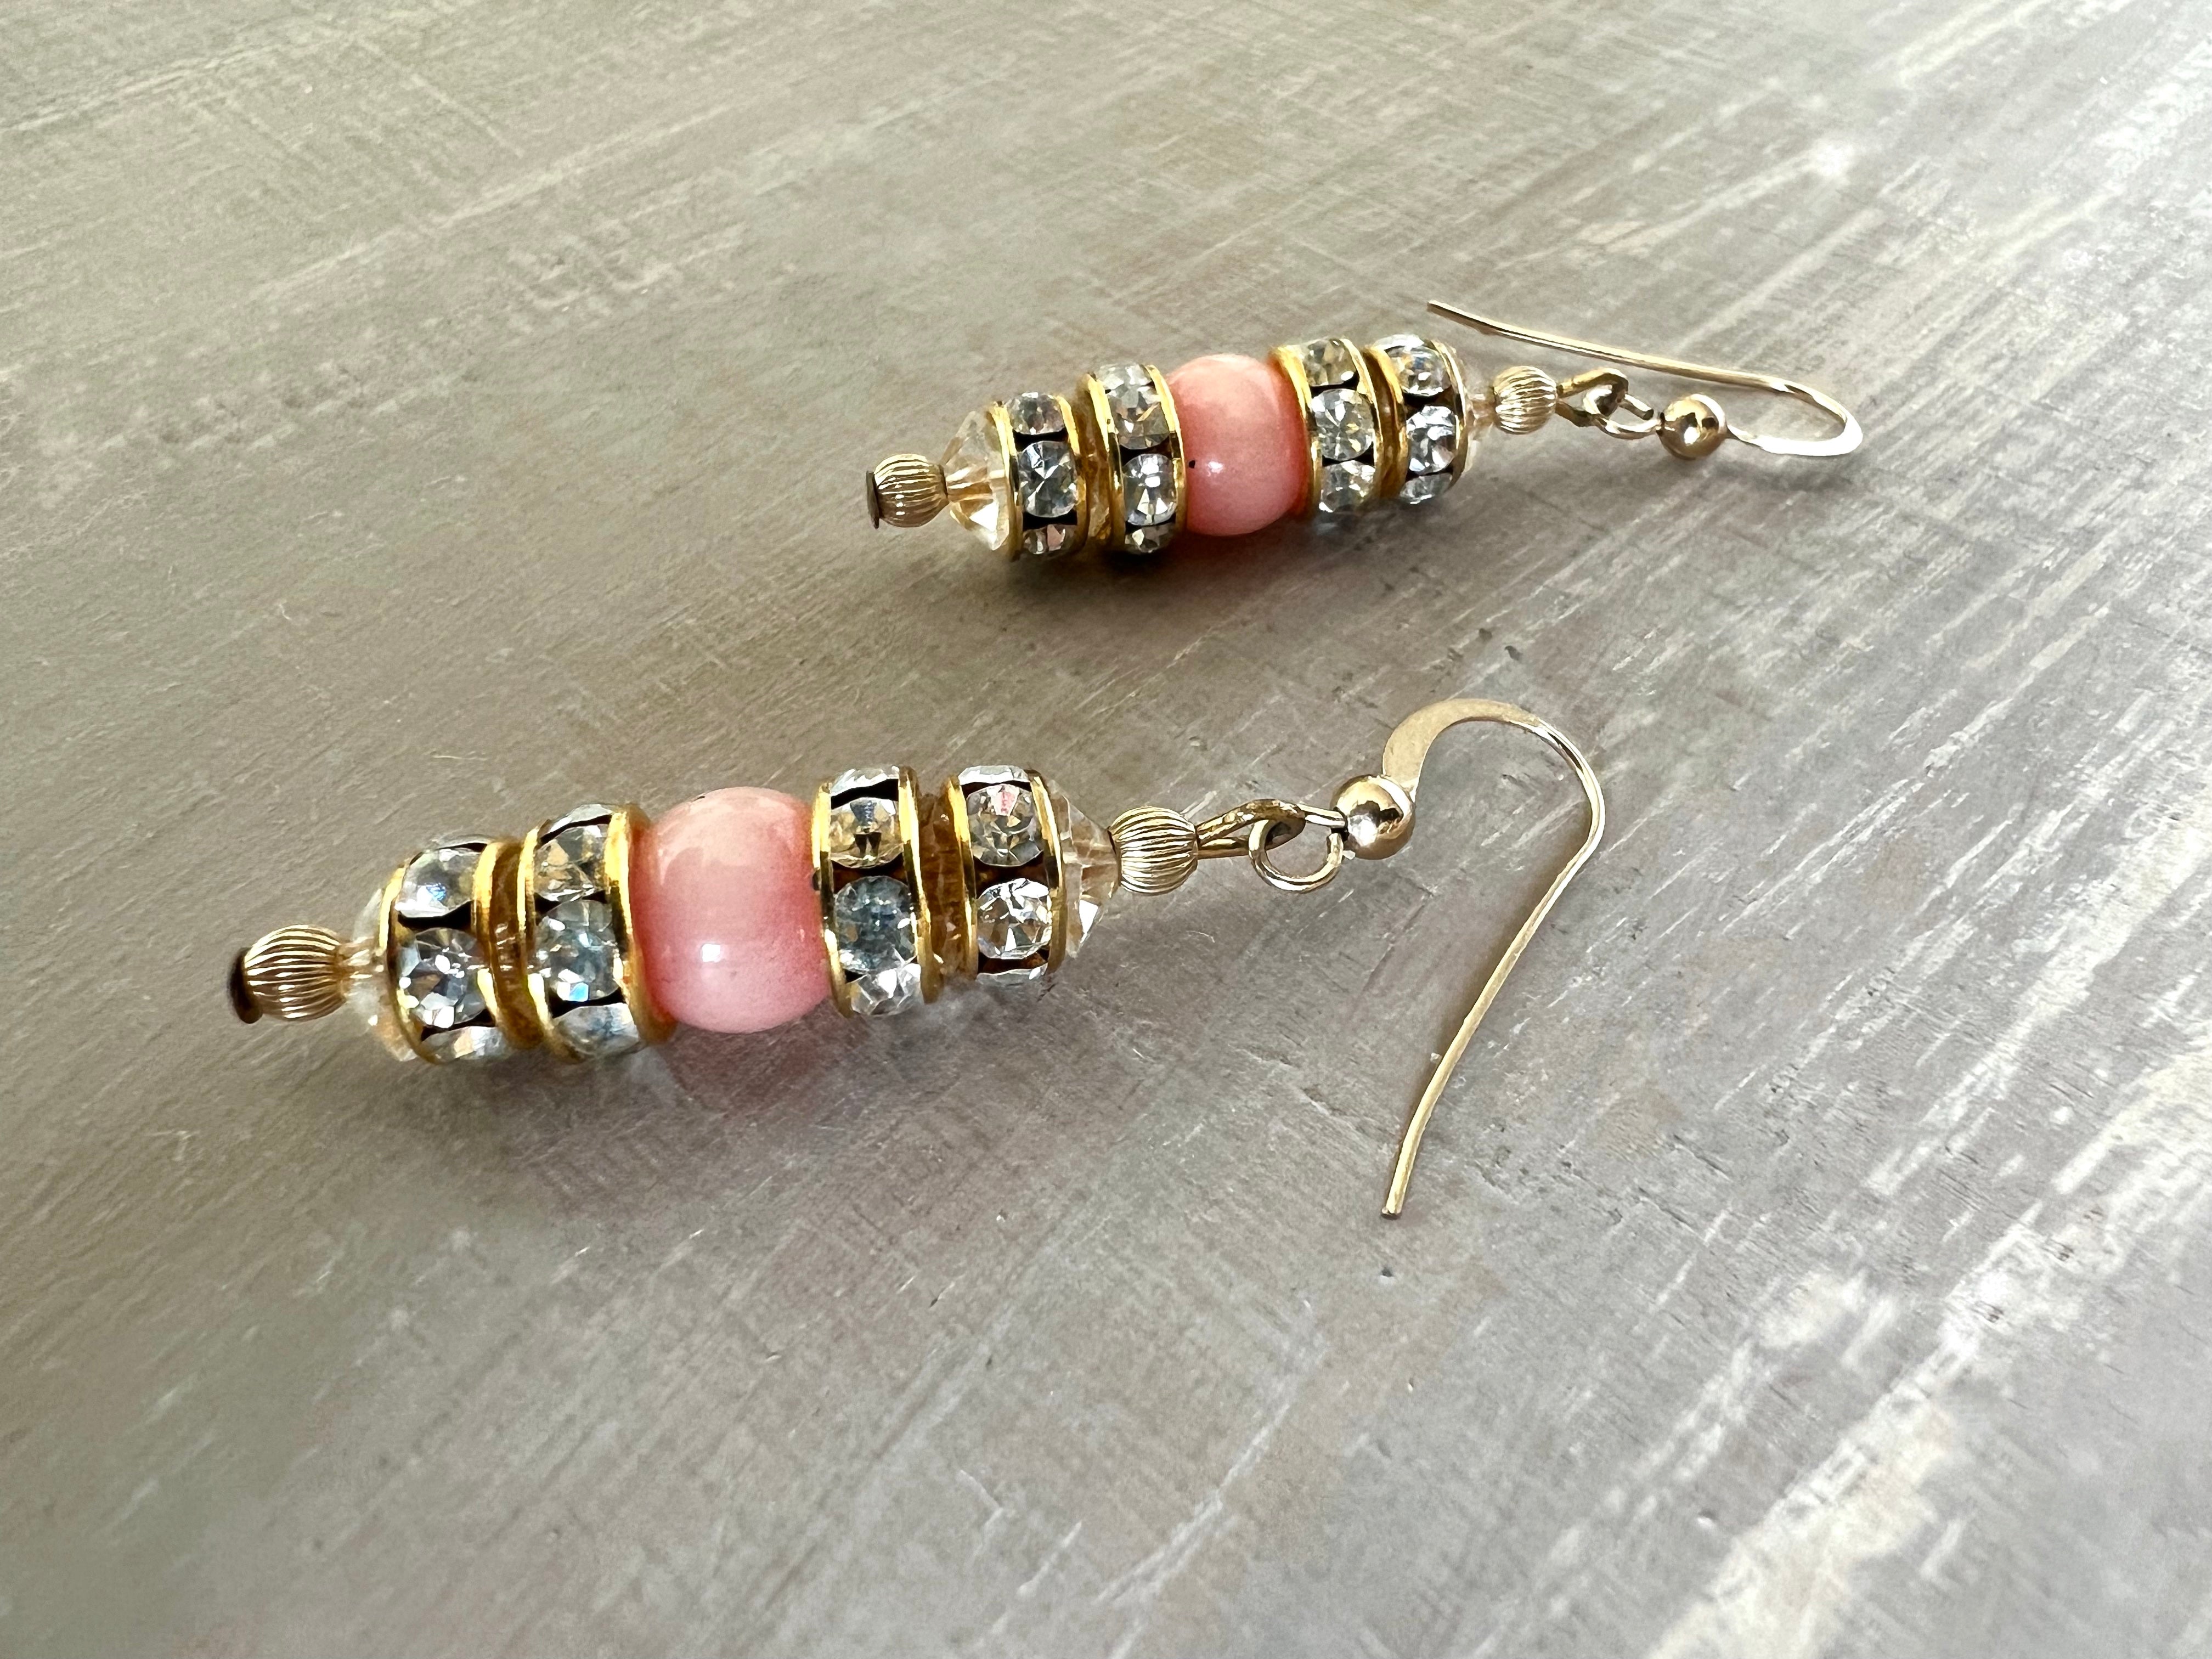 RGS-E056: Handcrafted Crystal & Coral Earrings